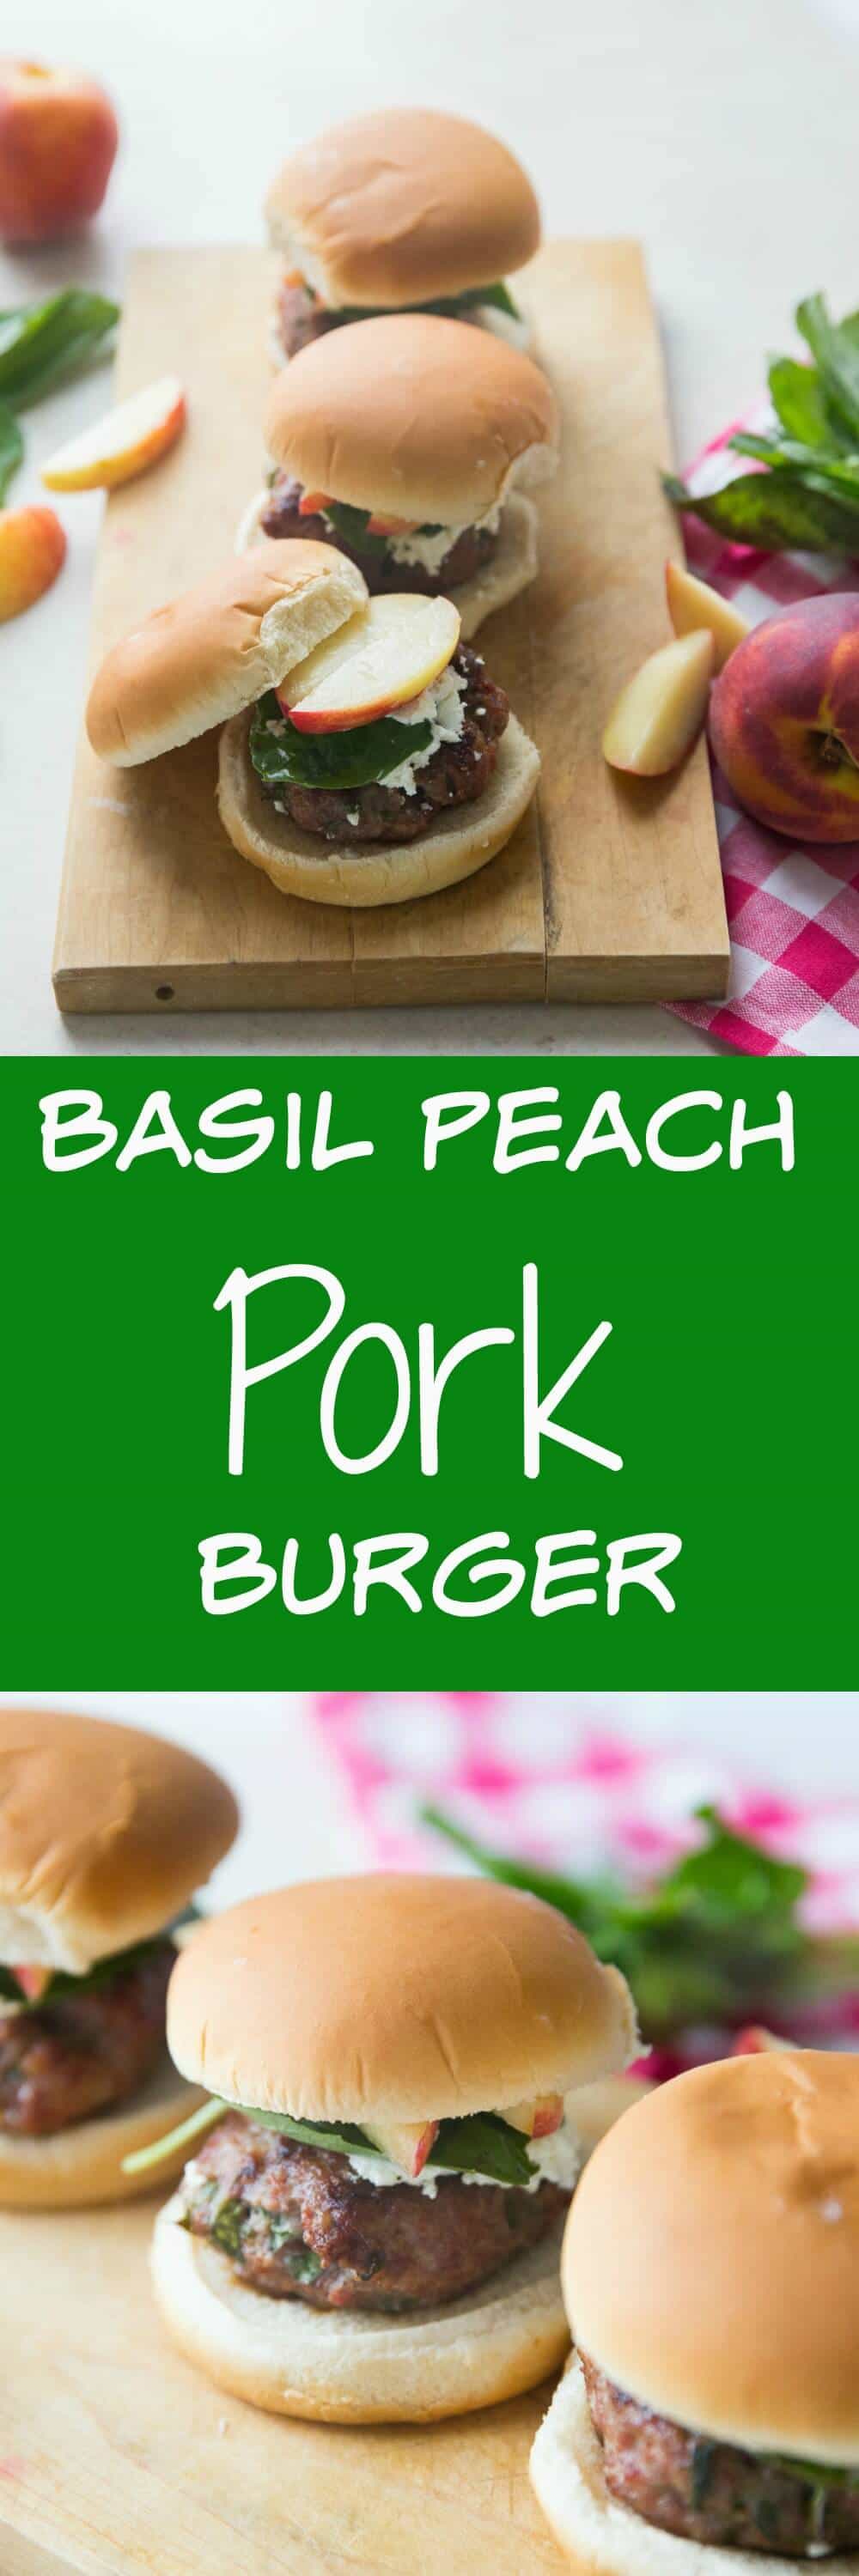 You have to try this pork burger recipe for your next cookout! Pork makes a super juicy burger and it tastes amazing with sweet peaches and tangy goat cheese!